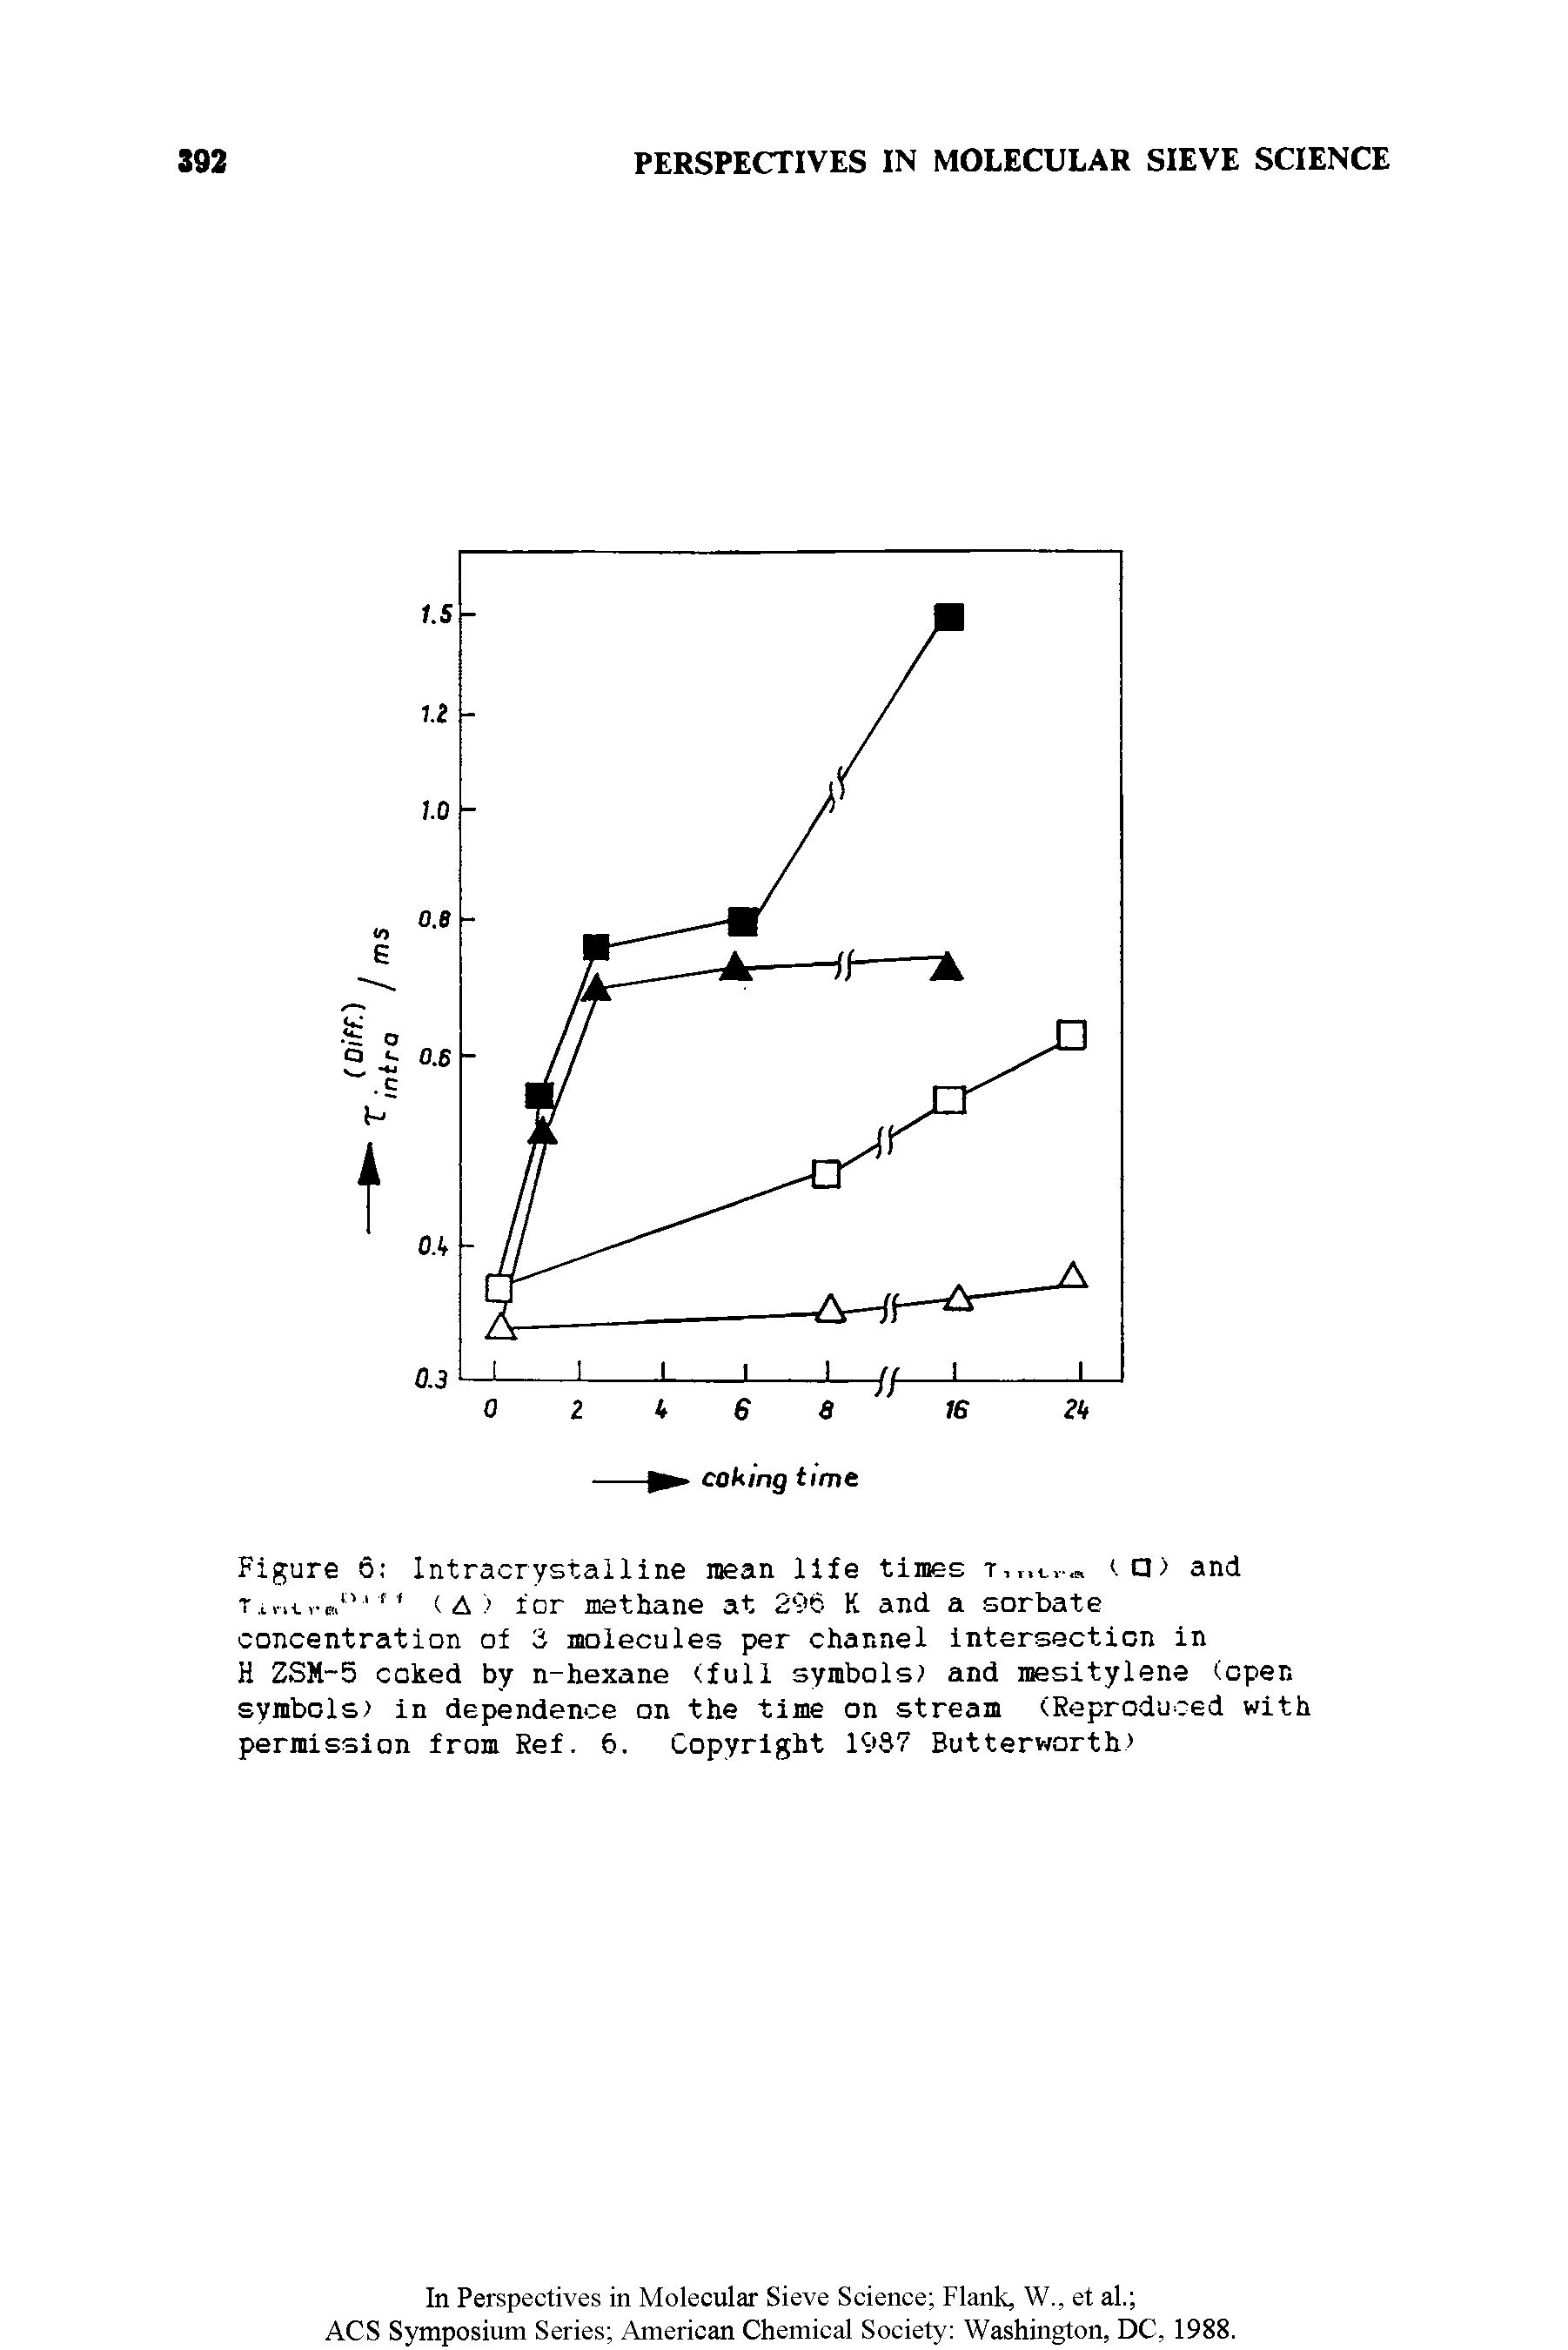 Figure 6 Intracrystalline mean life times t,<. > and Tini,, "1" (<4 ) for methane at 296 K and a sorbate concentration of 3 molecules per channel intersection in H ZSM-5 coked by n-hexane (full symbols and mesitylene (open symbols in dependence on the time on stream (Reproduced with permission from Ref. 6. Copyright 1 >S7 Butterworth ...